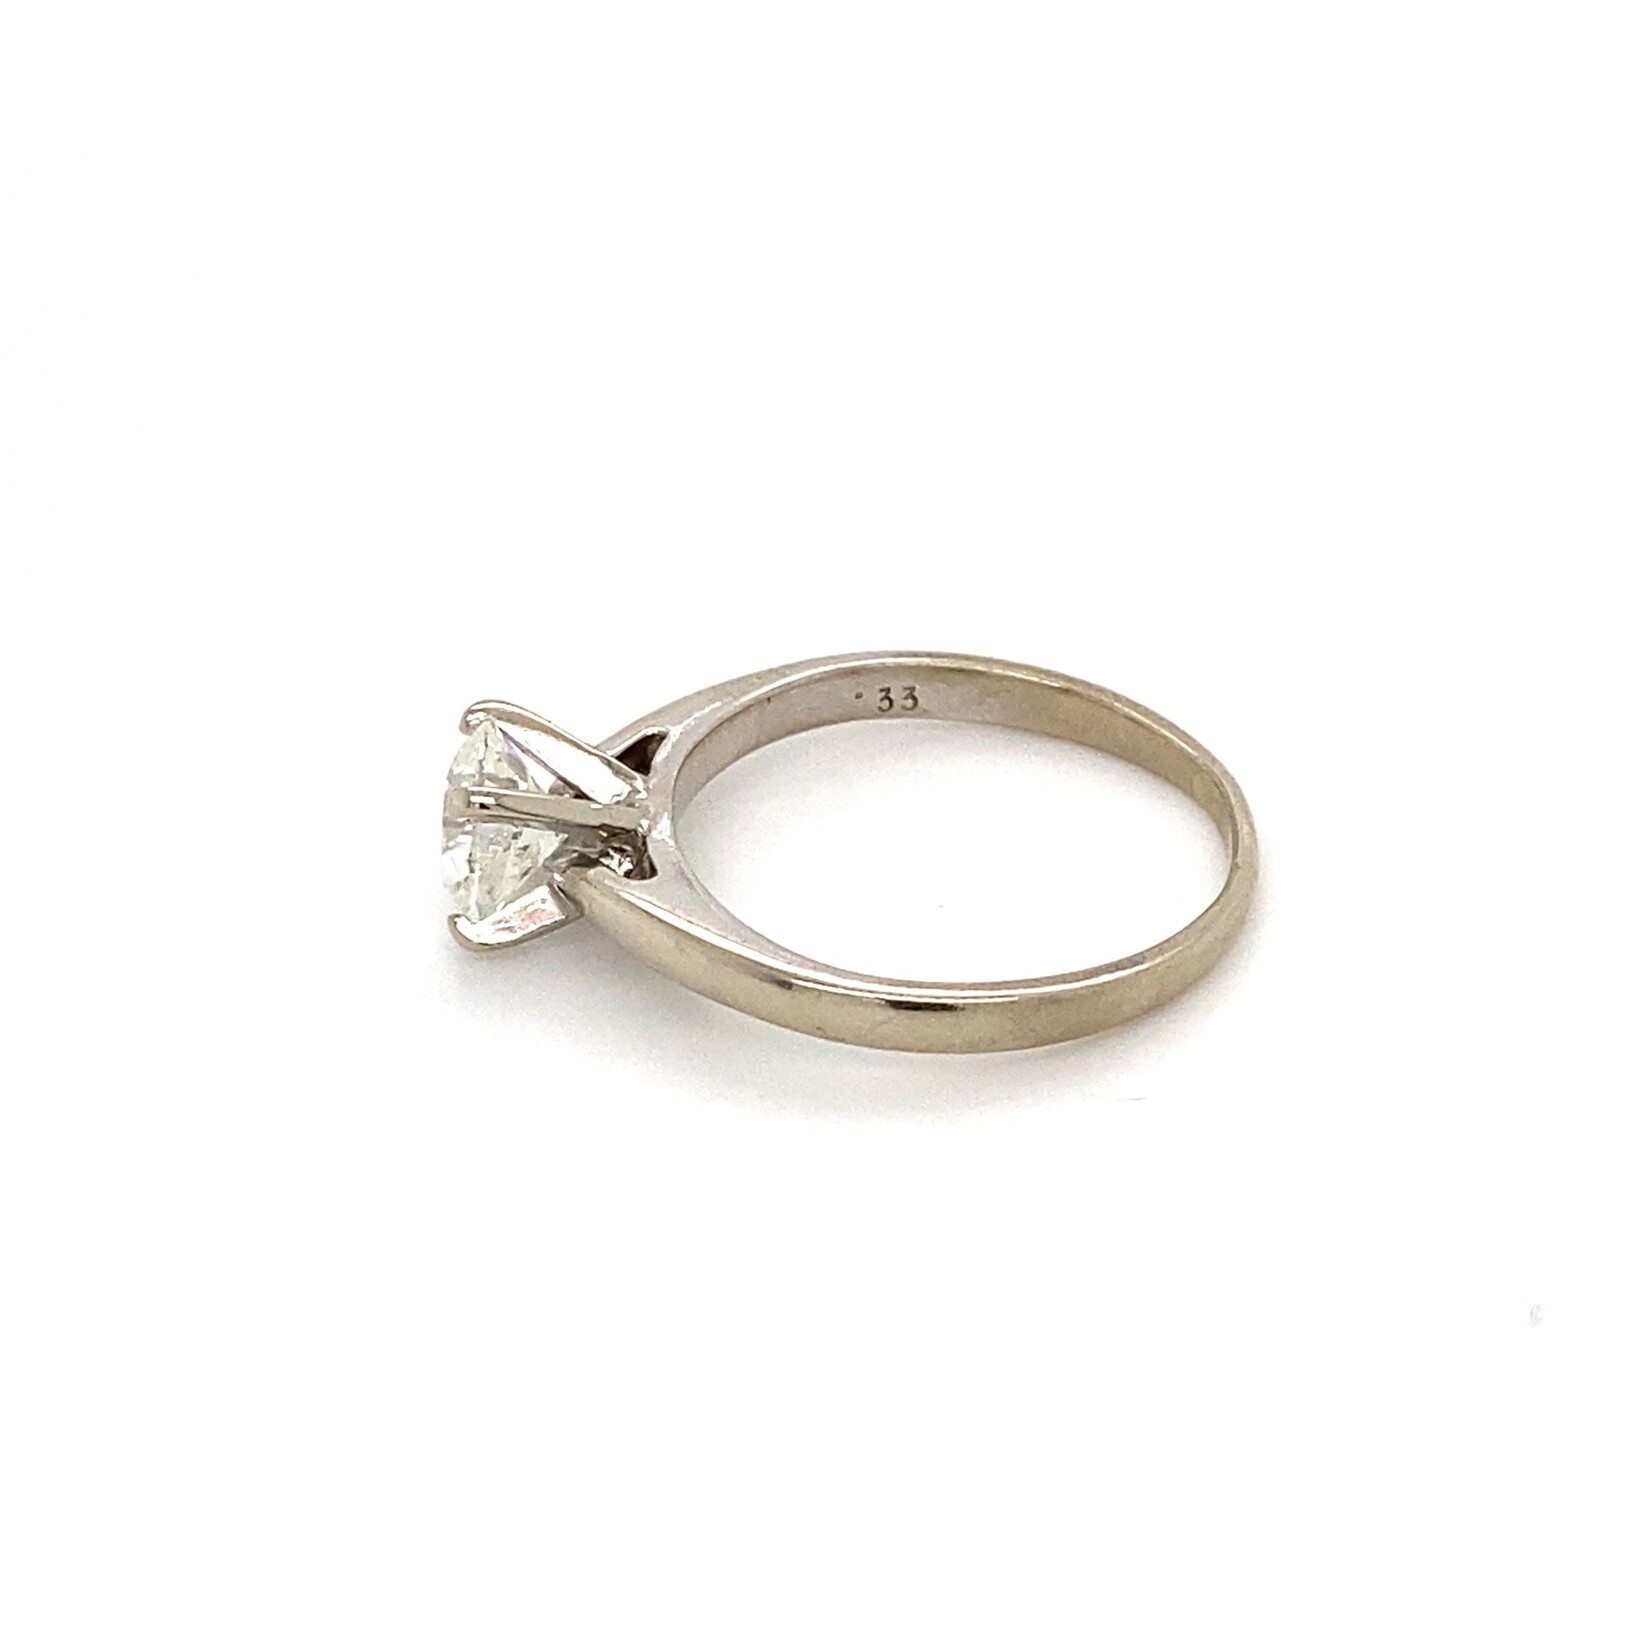 18K White Gold Diamond Solitaire ring 1ct H,I1 size 6.75